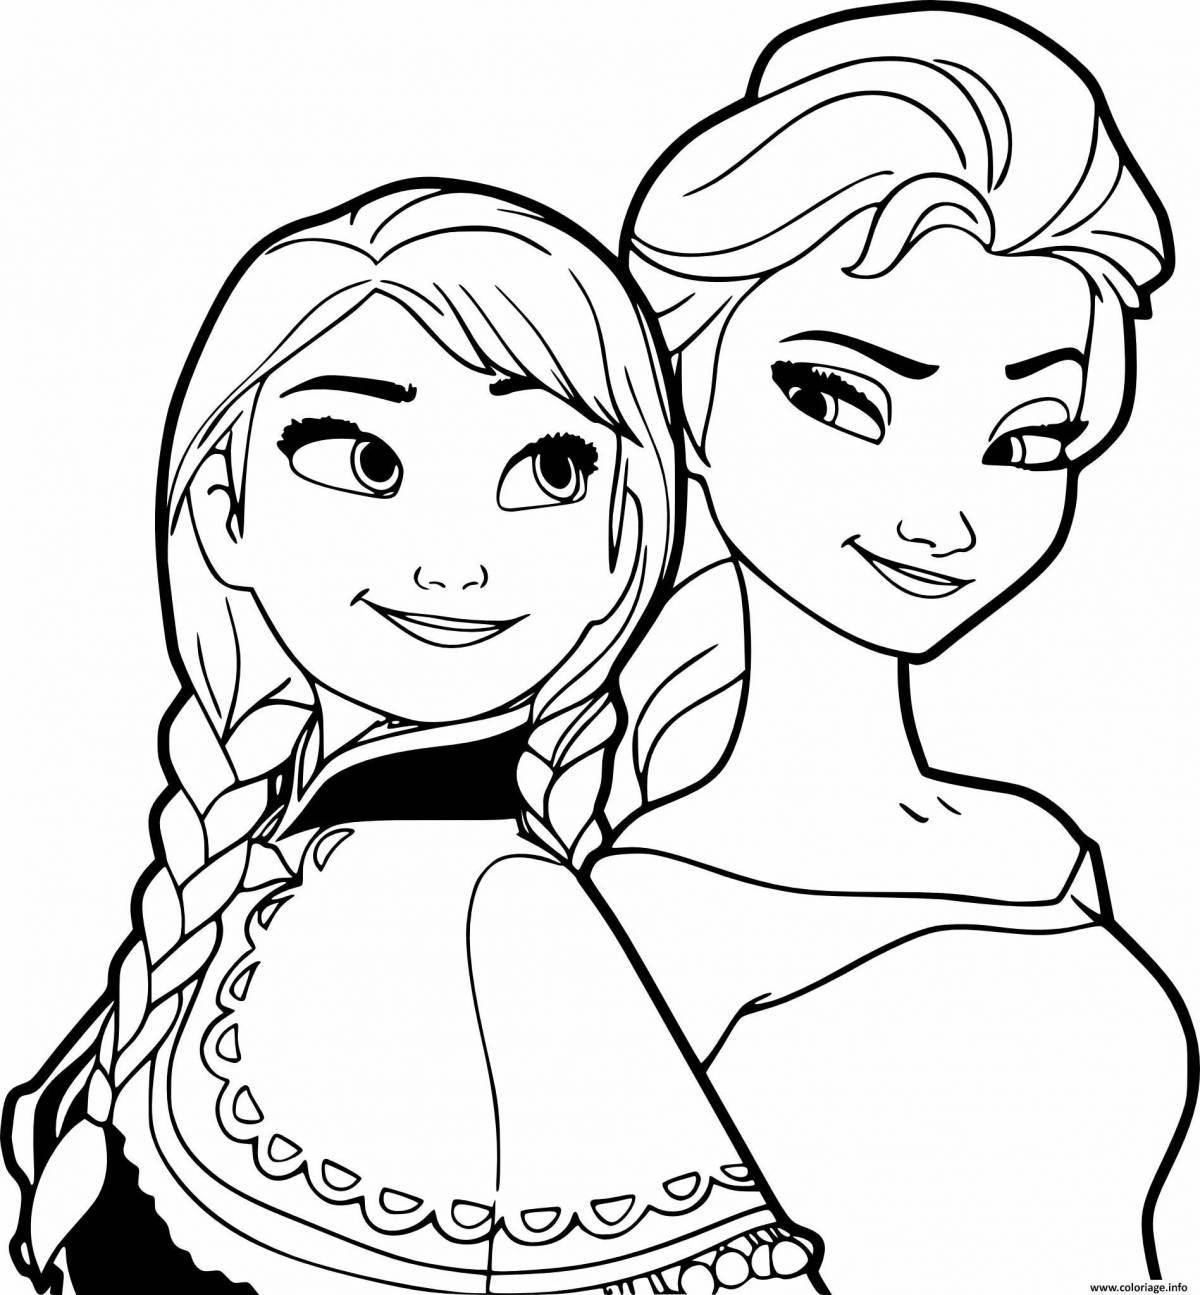 Elsa glowing coloring game for girls